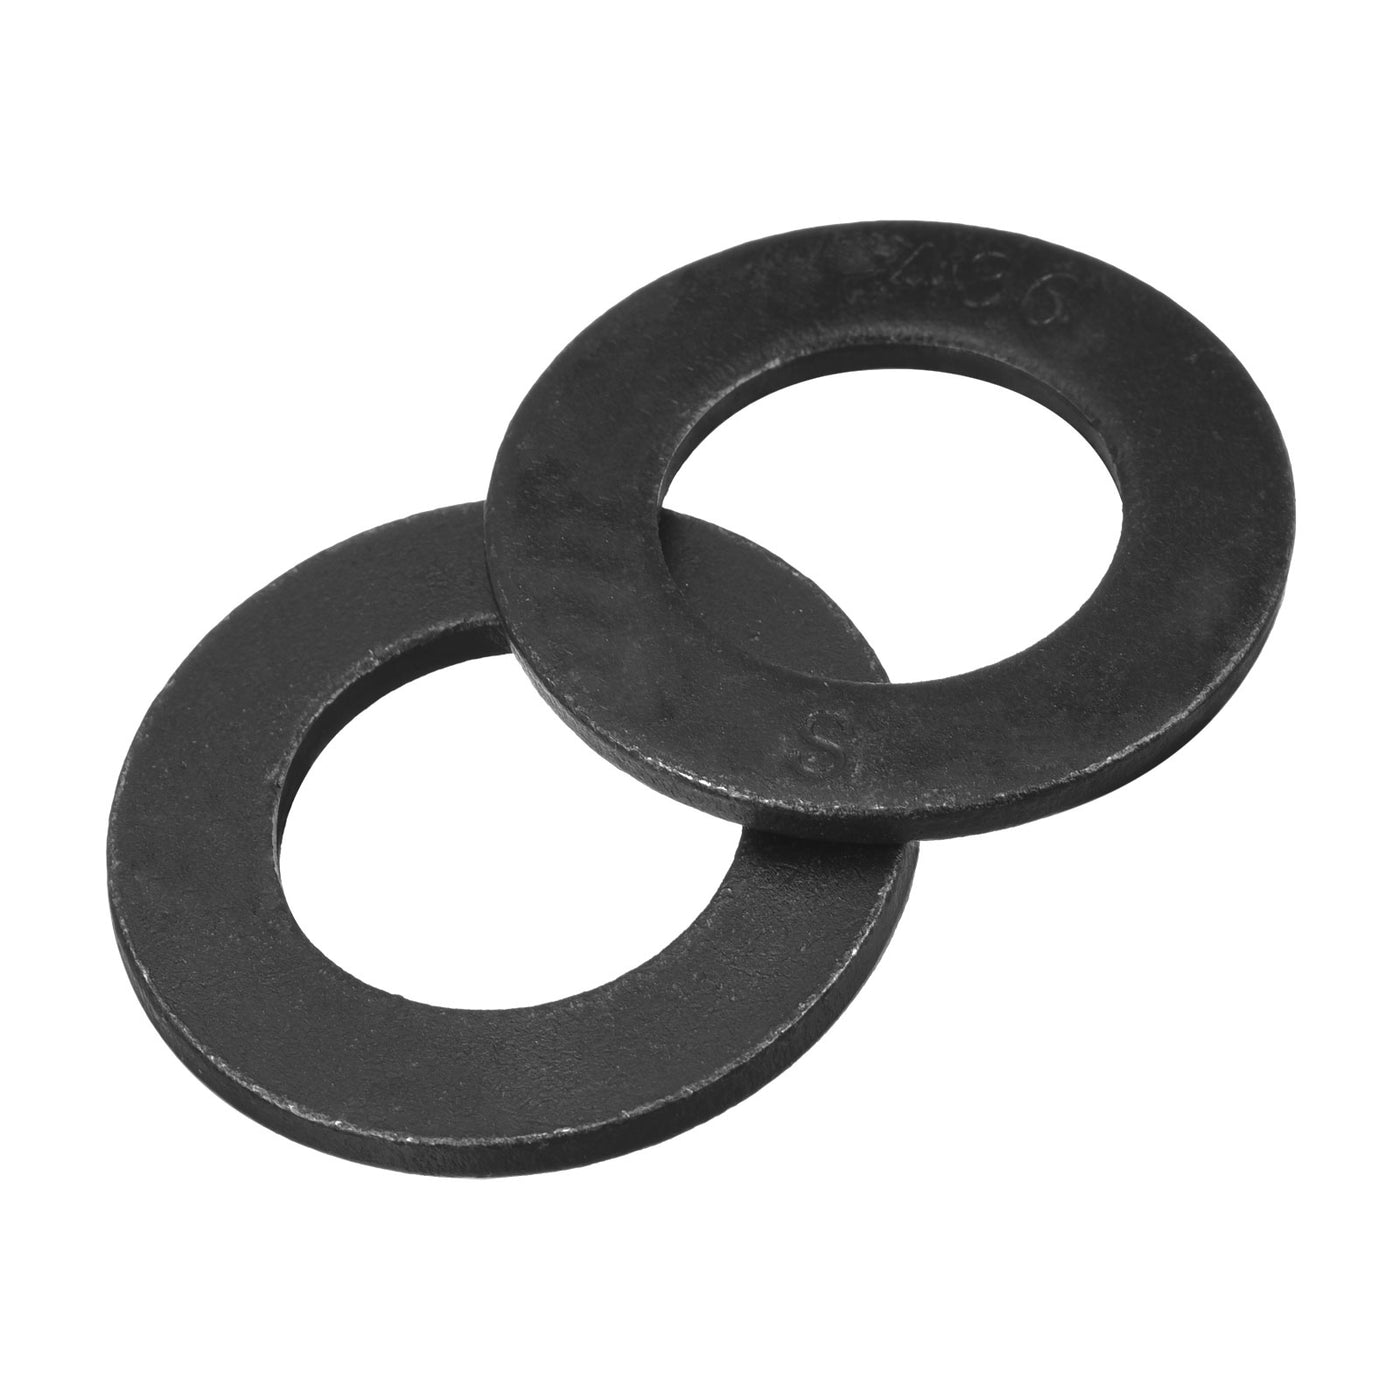 uxcell Uxcell 1-Inch Flat Washer, Alloy Steel Black Oxide Finish Pack of 10